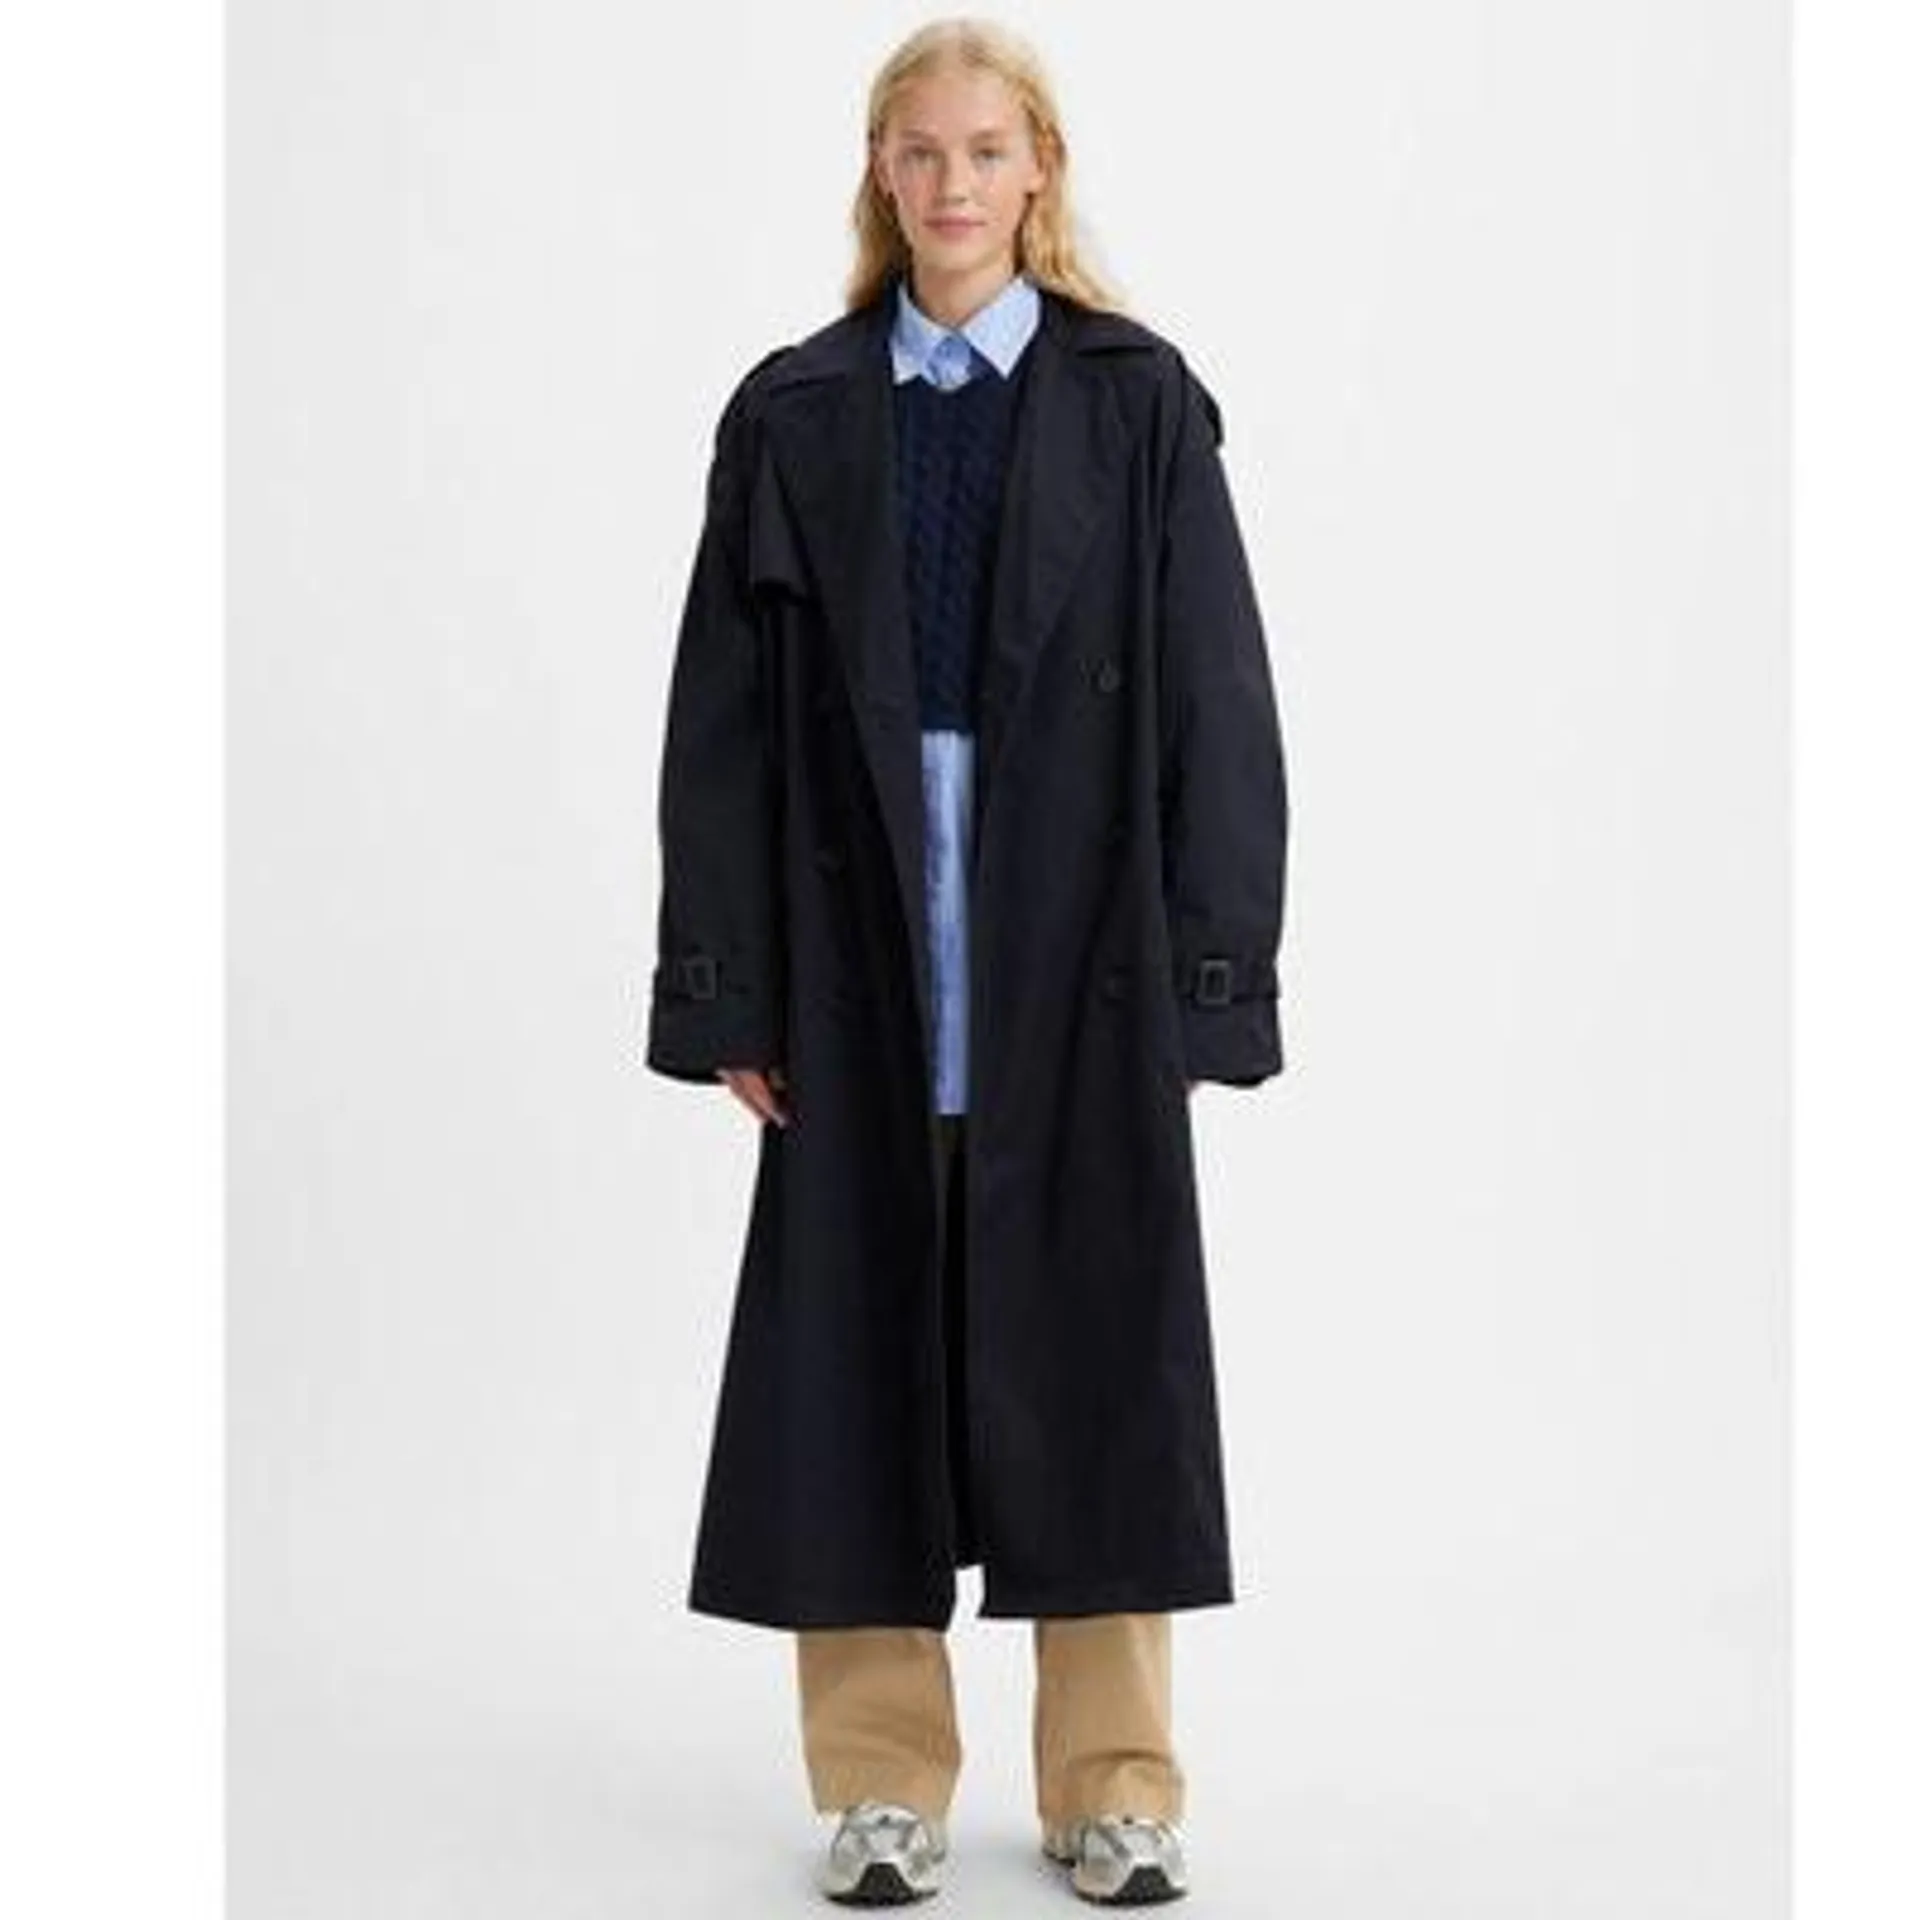 Cotton Long Trench Coat